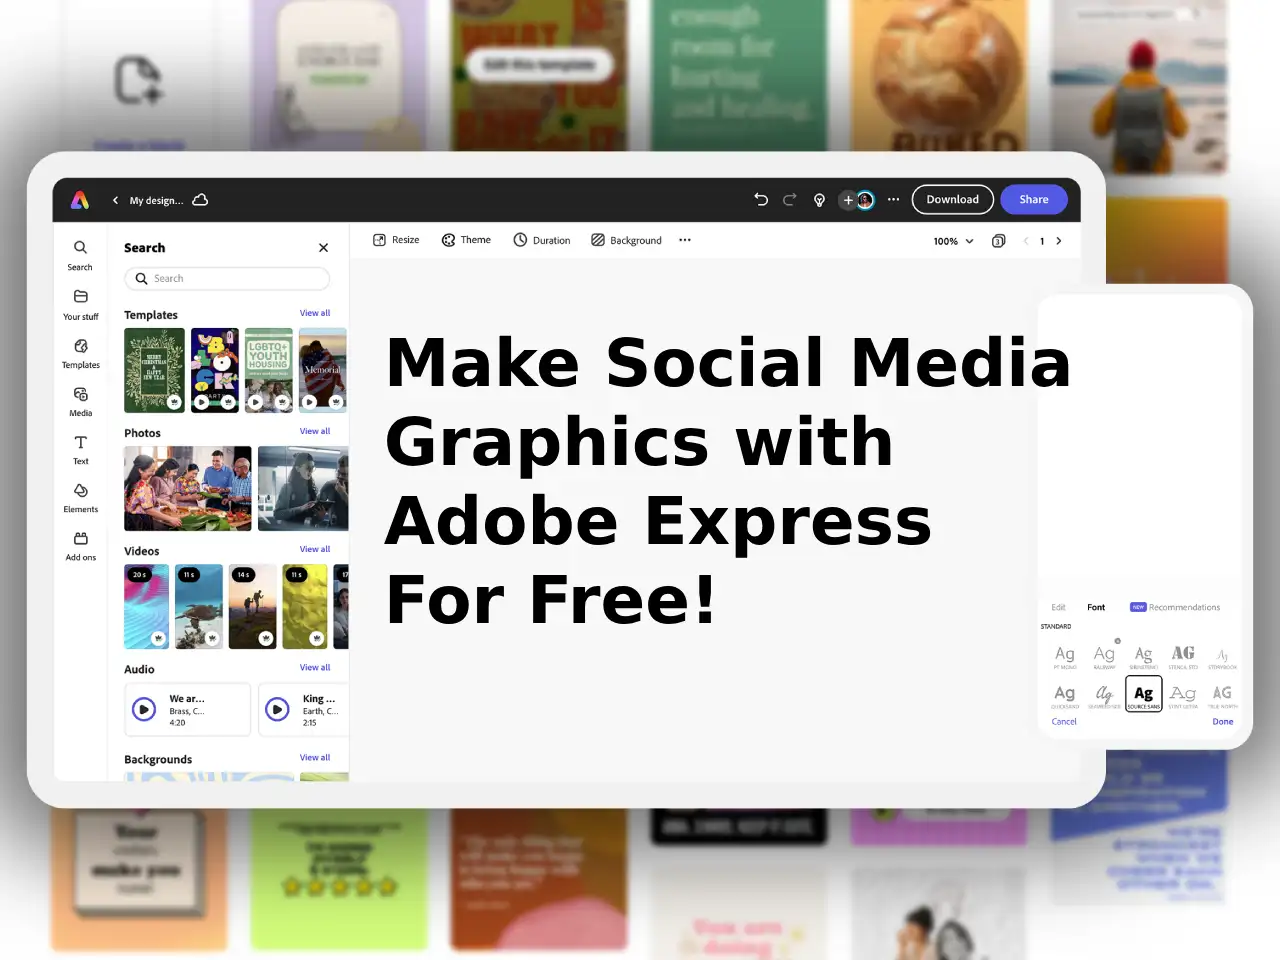 Make Social Media Graphics with Adobe Express for free